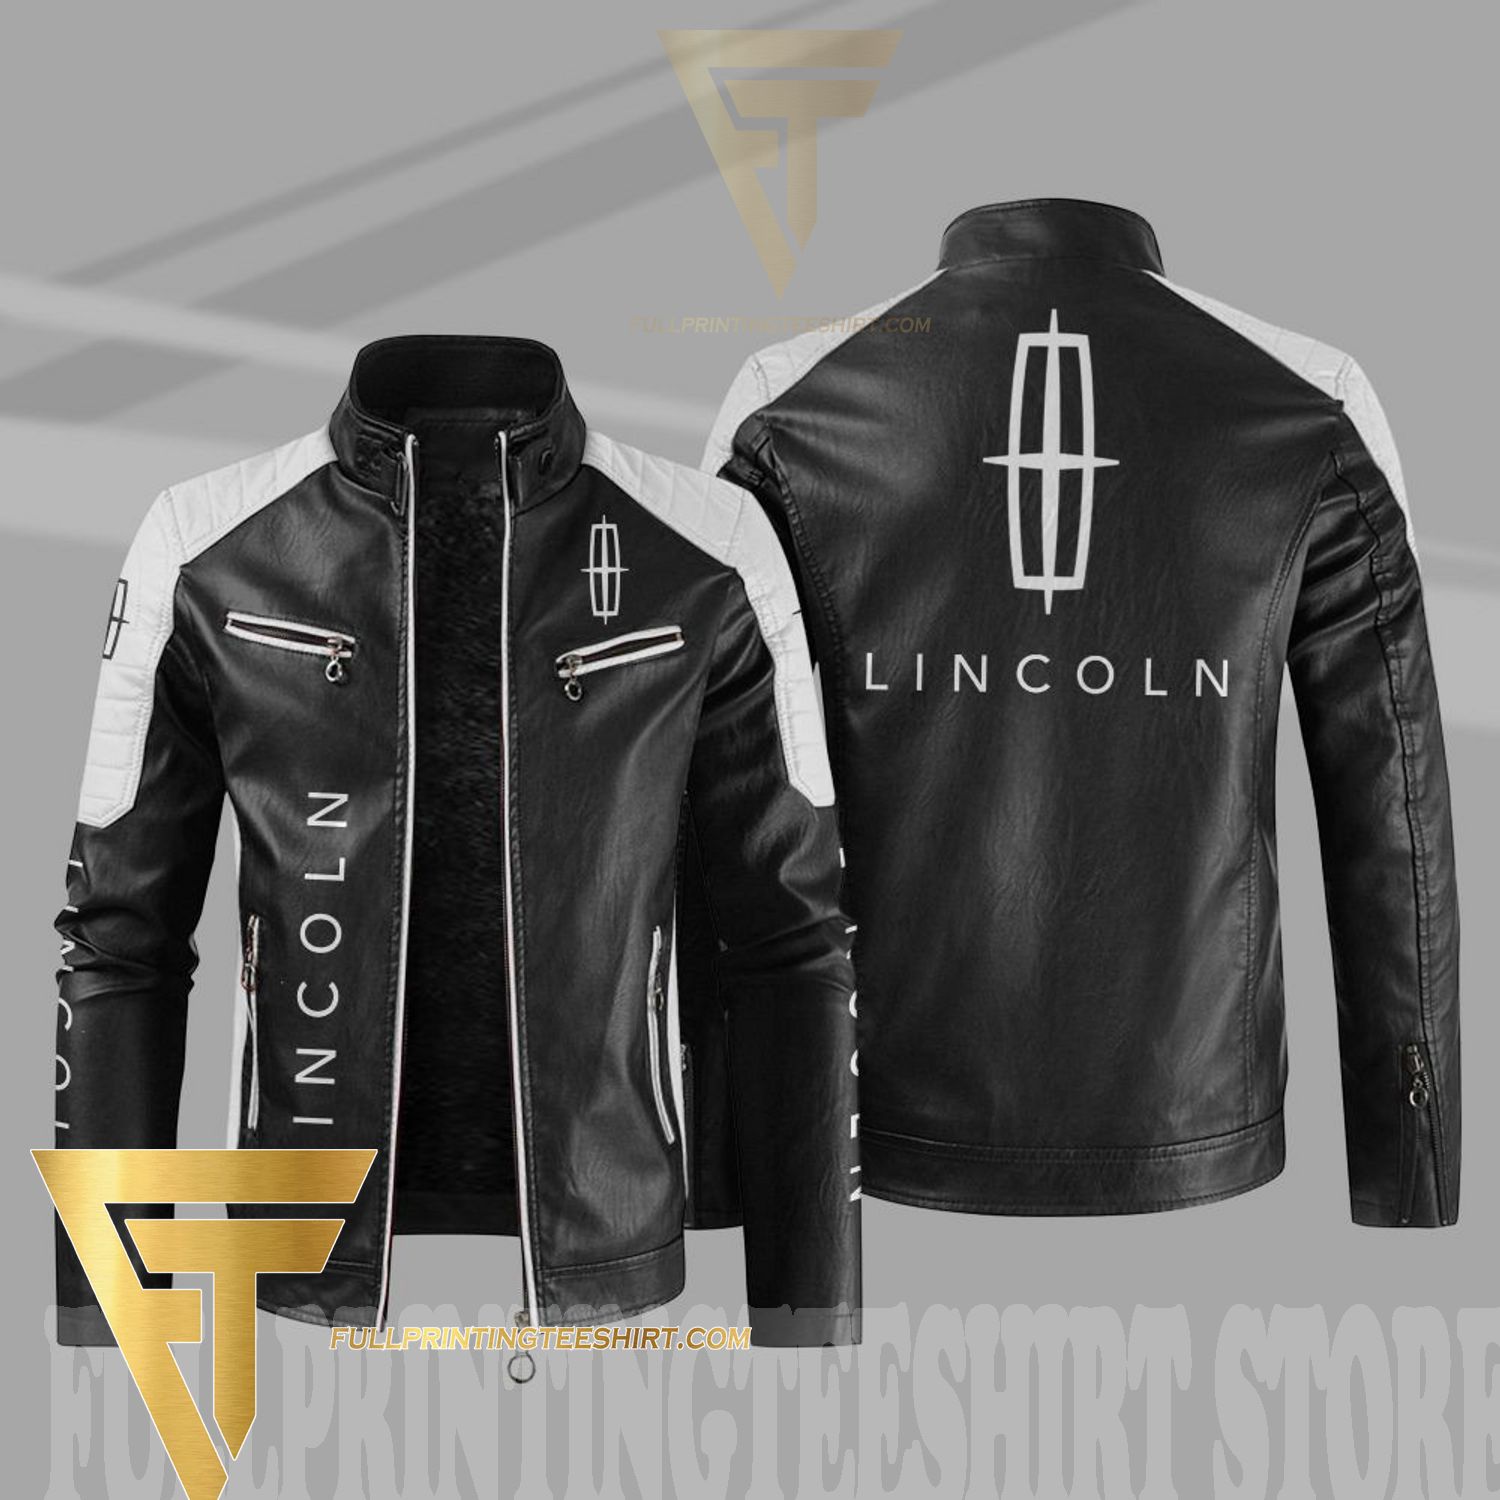 Top-selling item] Lincoln Car Symbol All Print Jacket Over